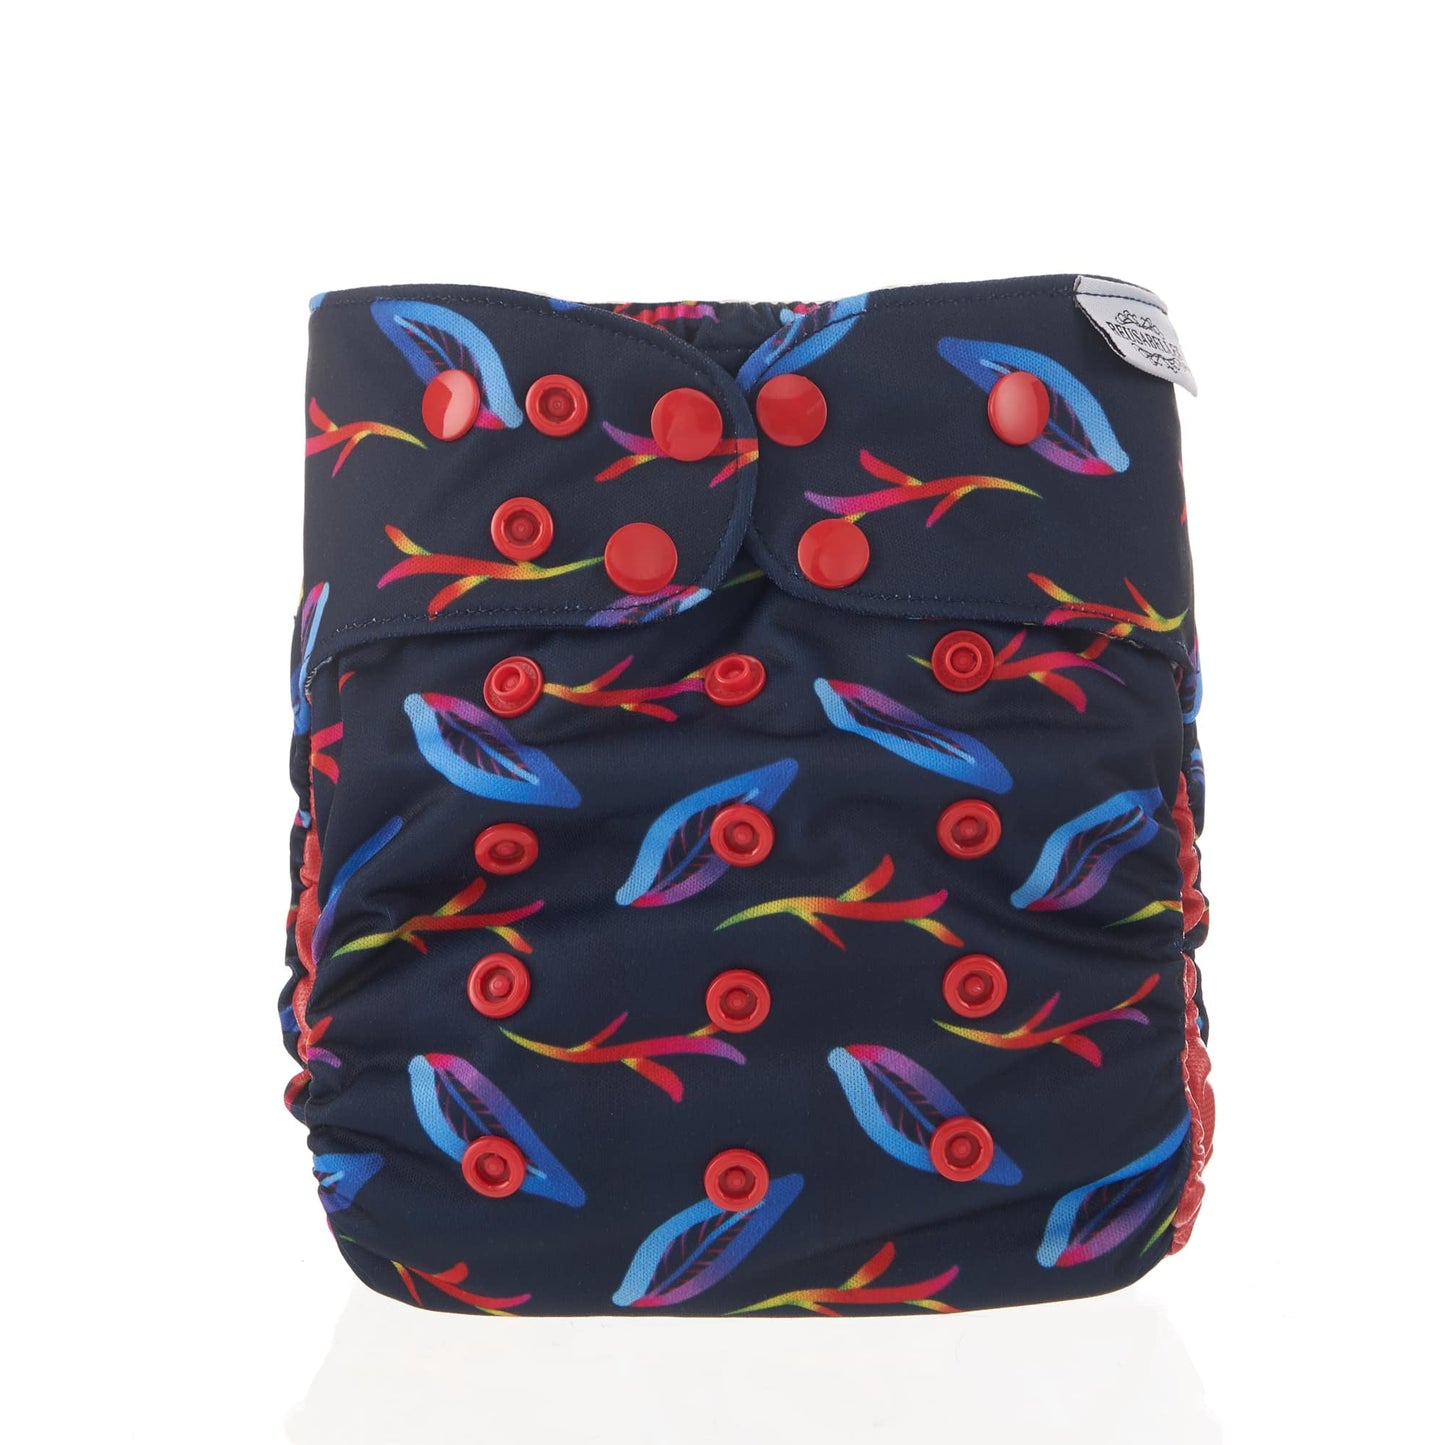 Reusable cloth nappy with a rainbow leaf pattern.